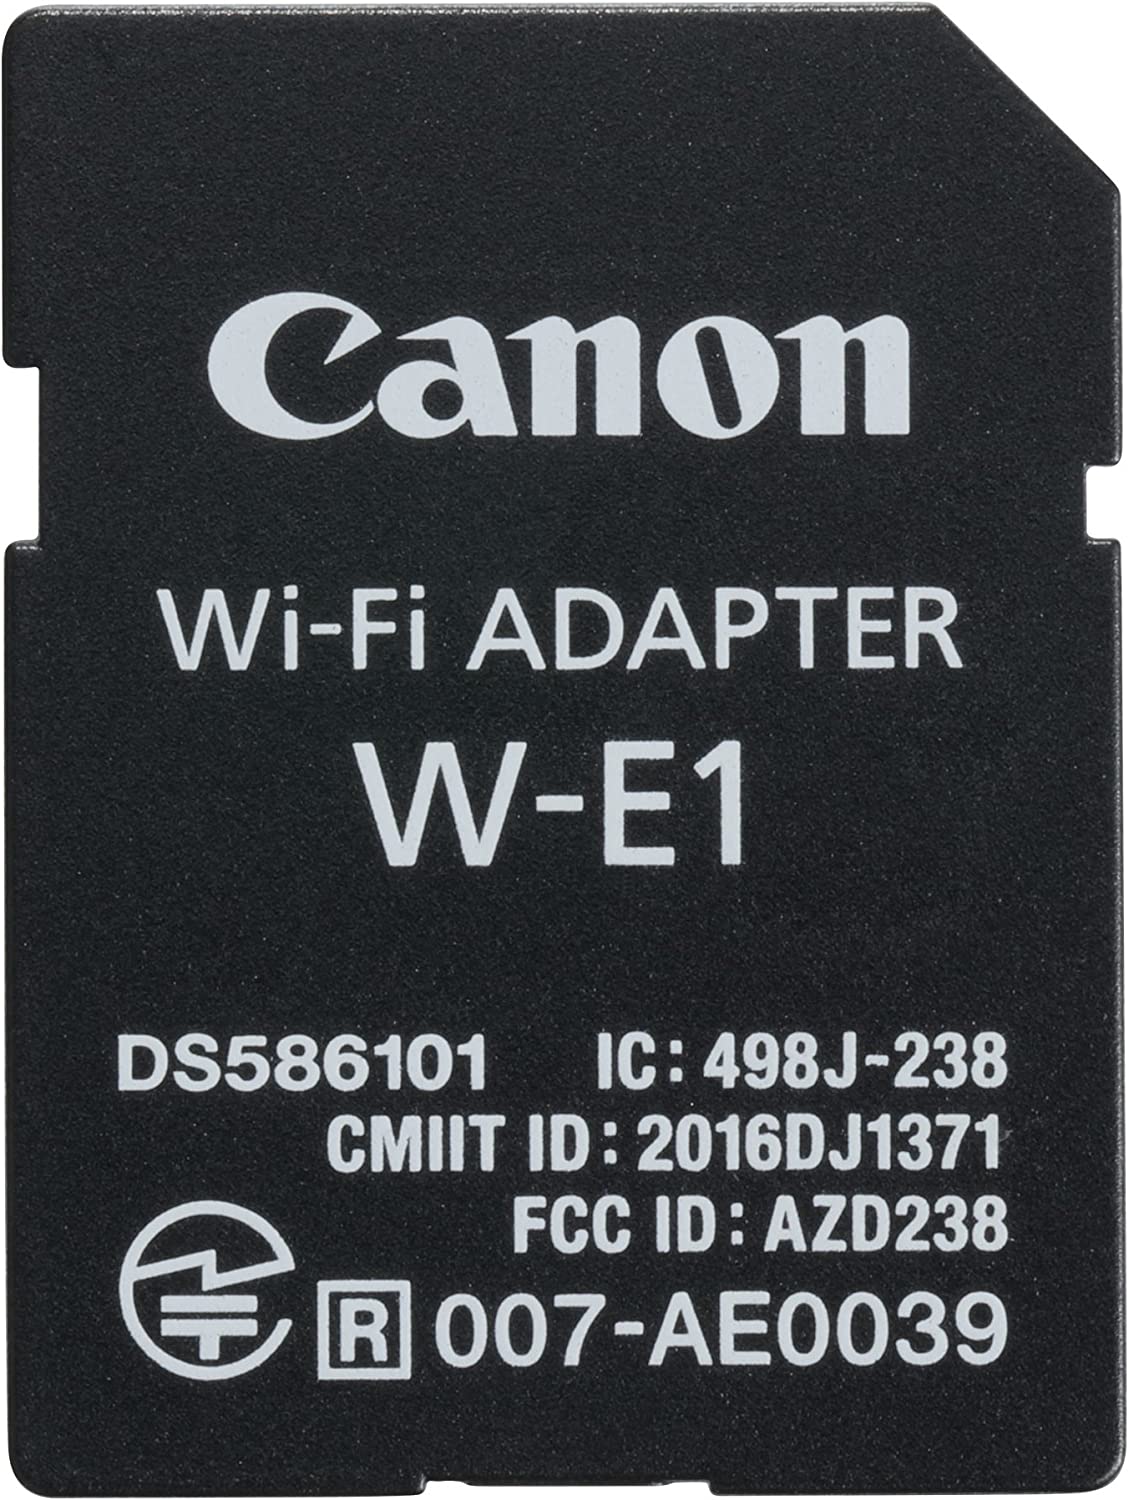 Canon W-E1 Wi-Fi Mobile Adapter for EOS 7D Mark II, EOS 5DS, EOS 5DS R Cameras